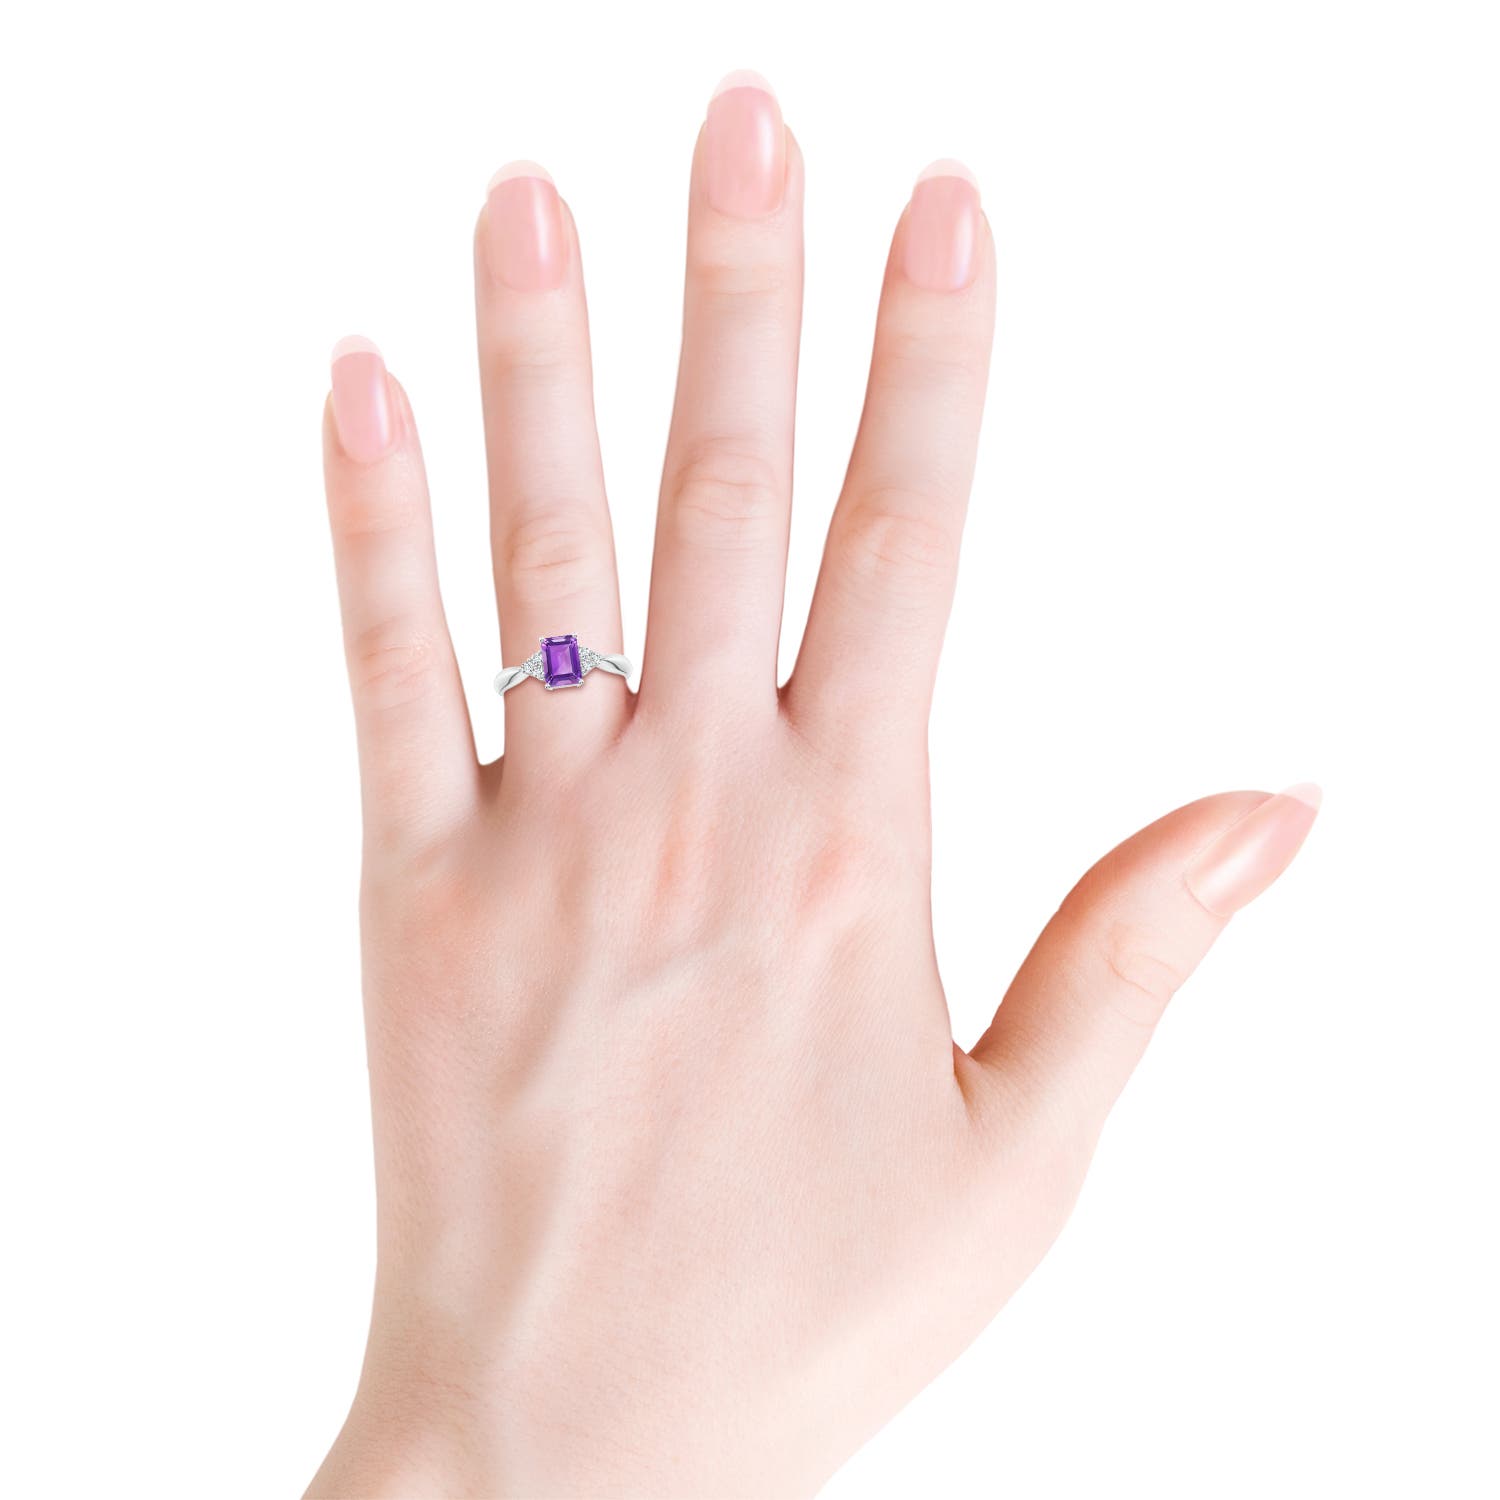 AA - Amethyst / 1.07 CT / 14 KT White Gold